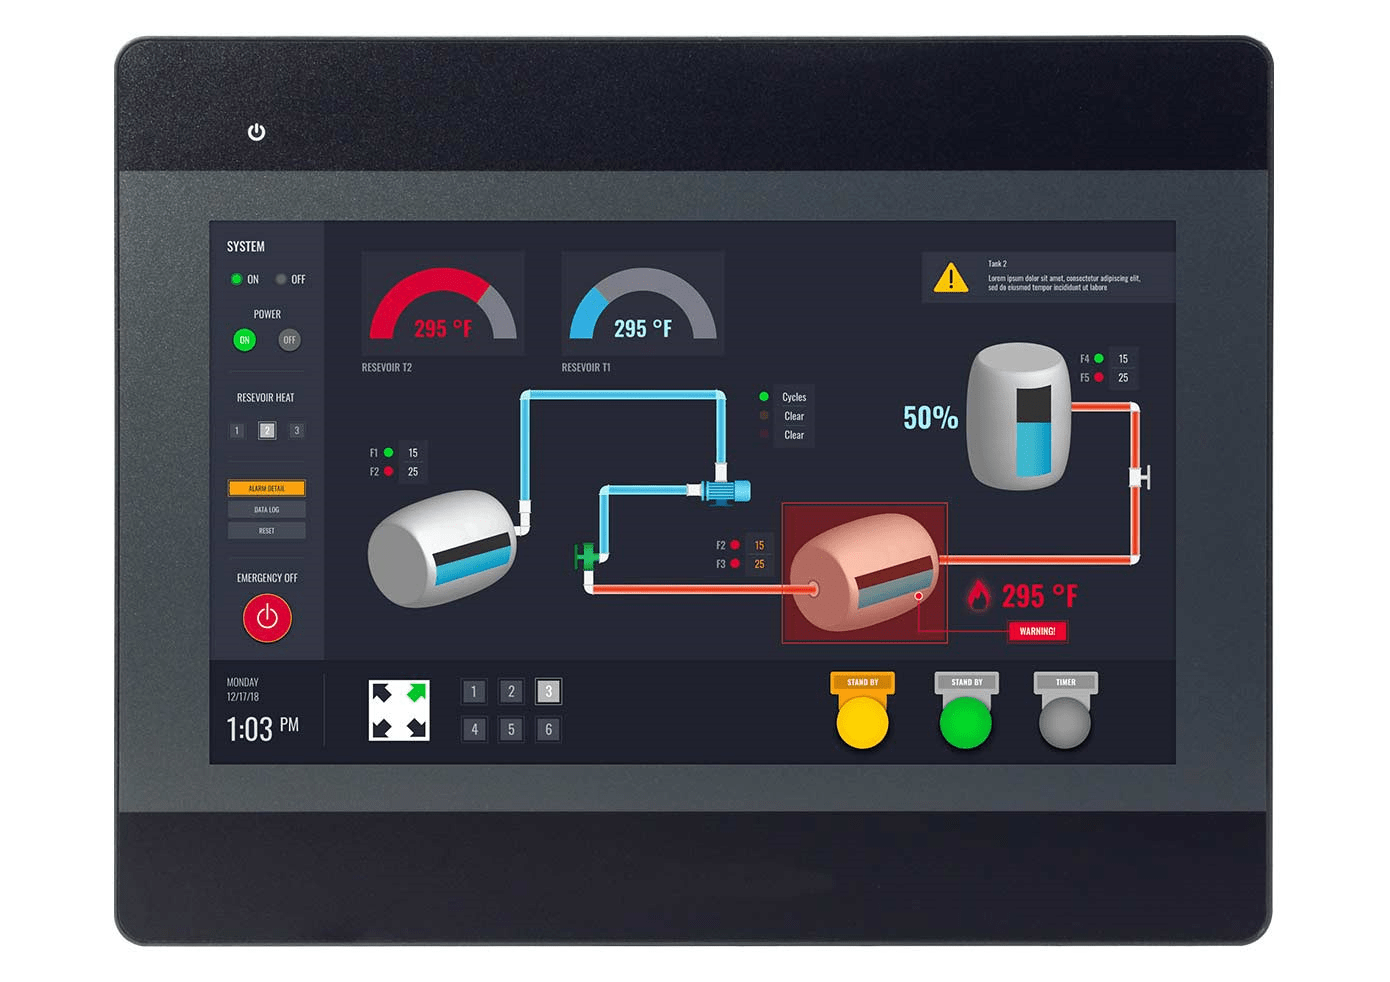 10 inch Basic HMI with Touchscreen and Graphic User Interface